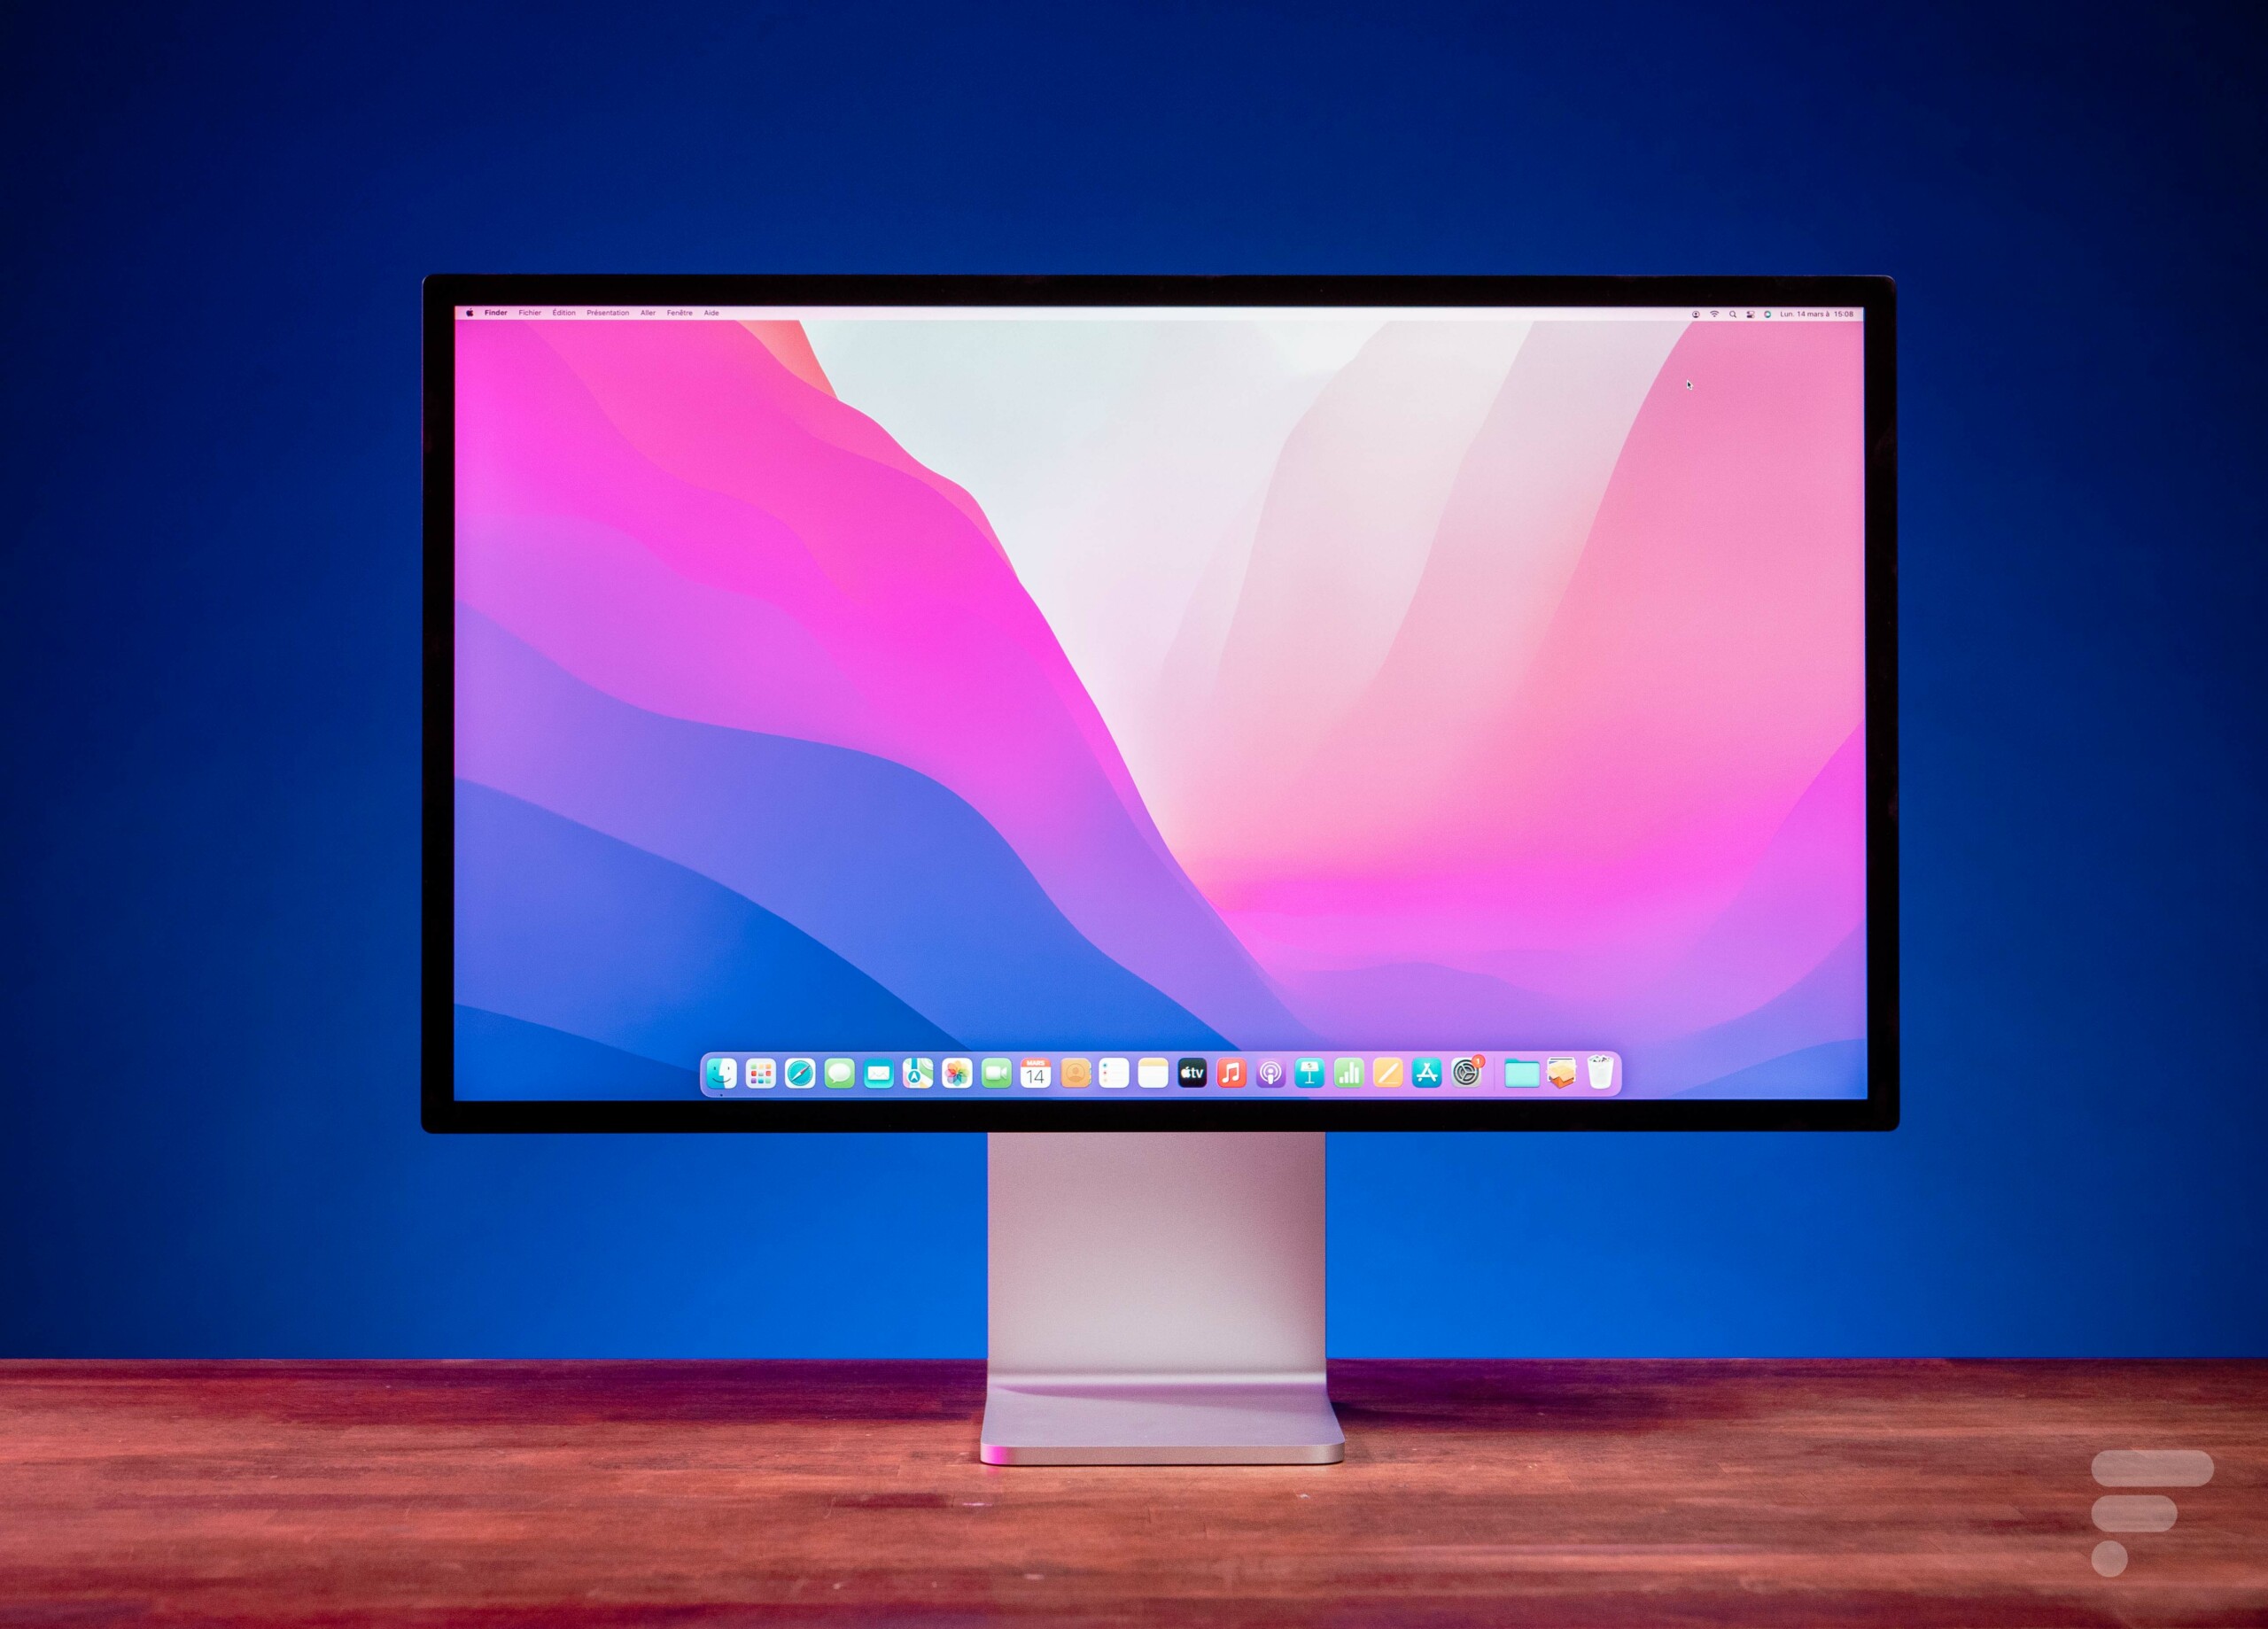 After the Studio Display, Apple would have a new screen ideal for